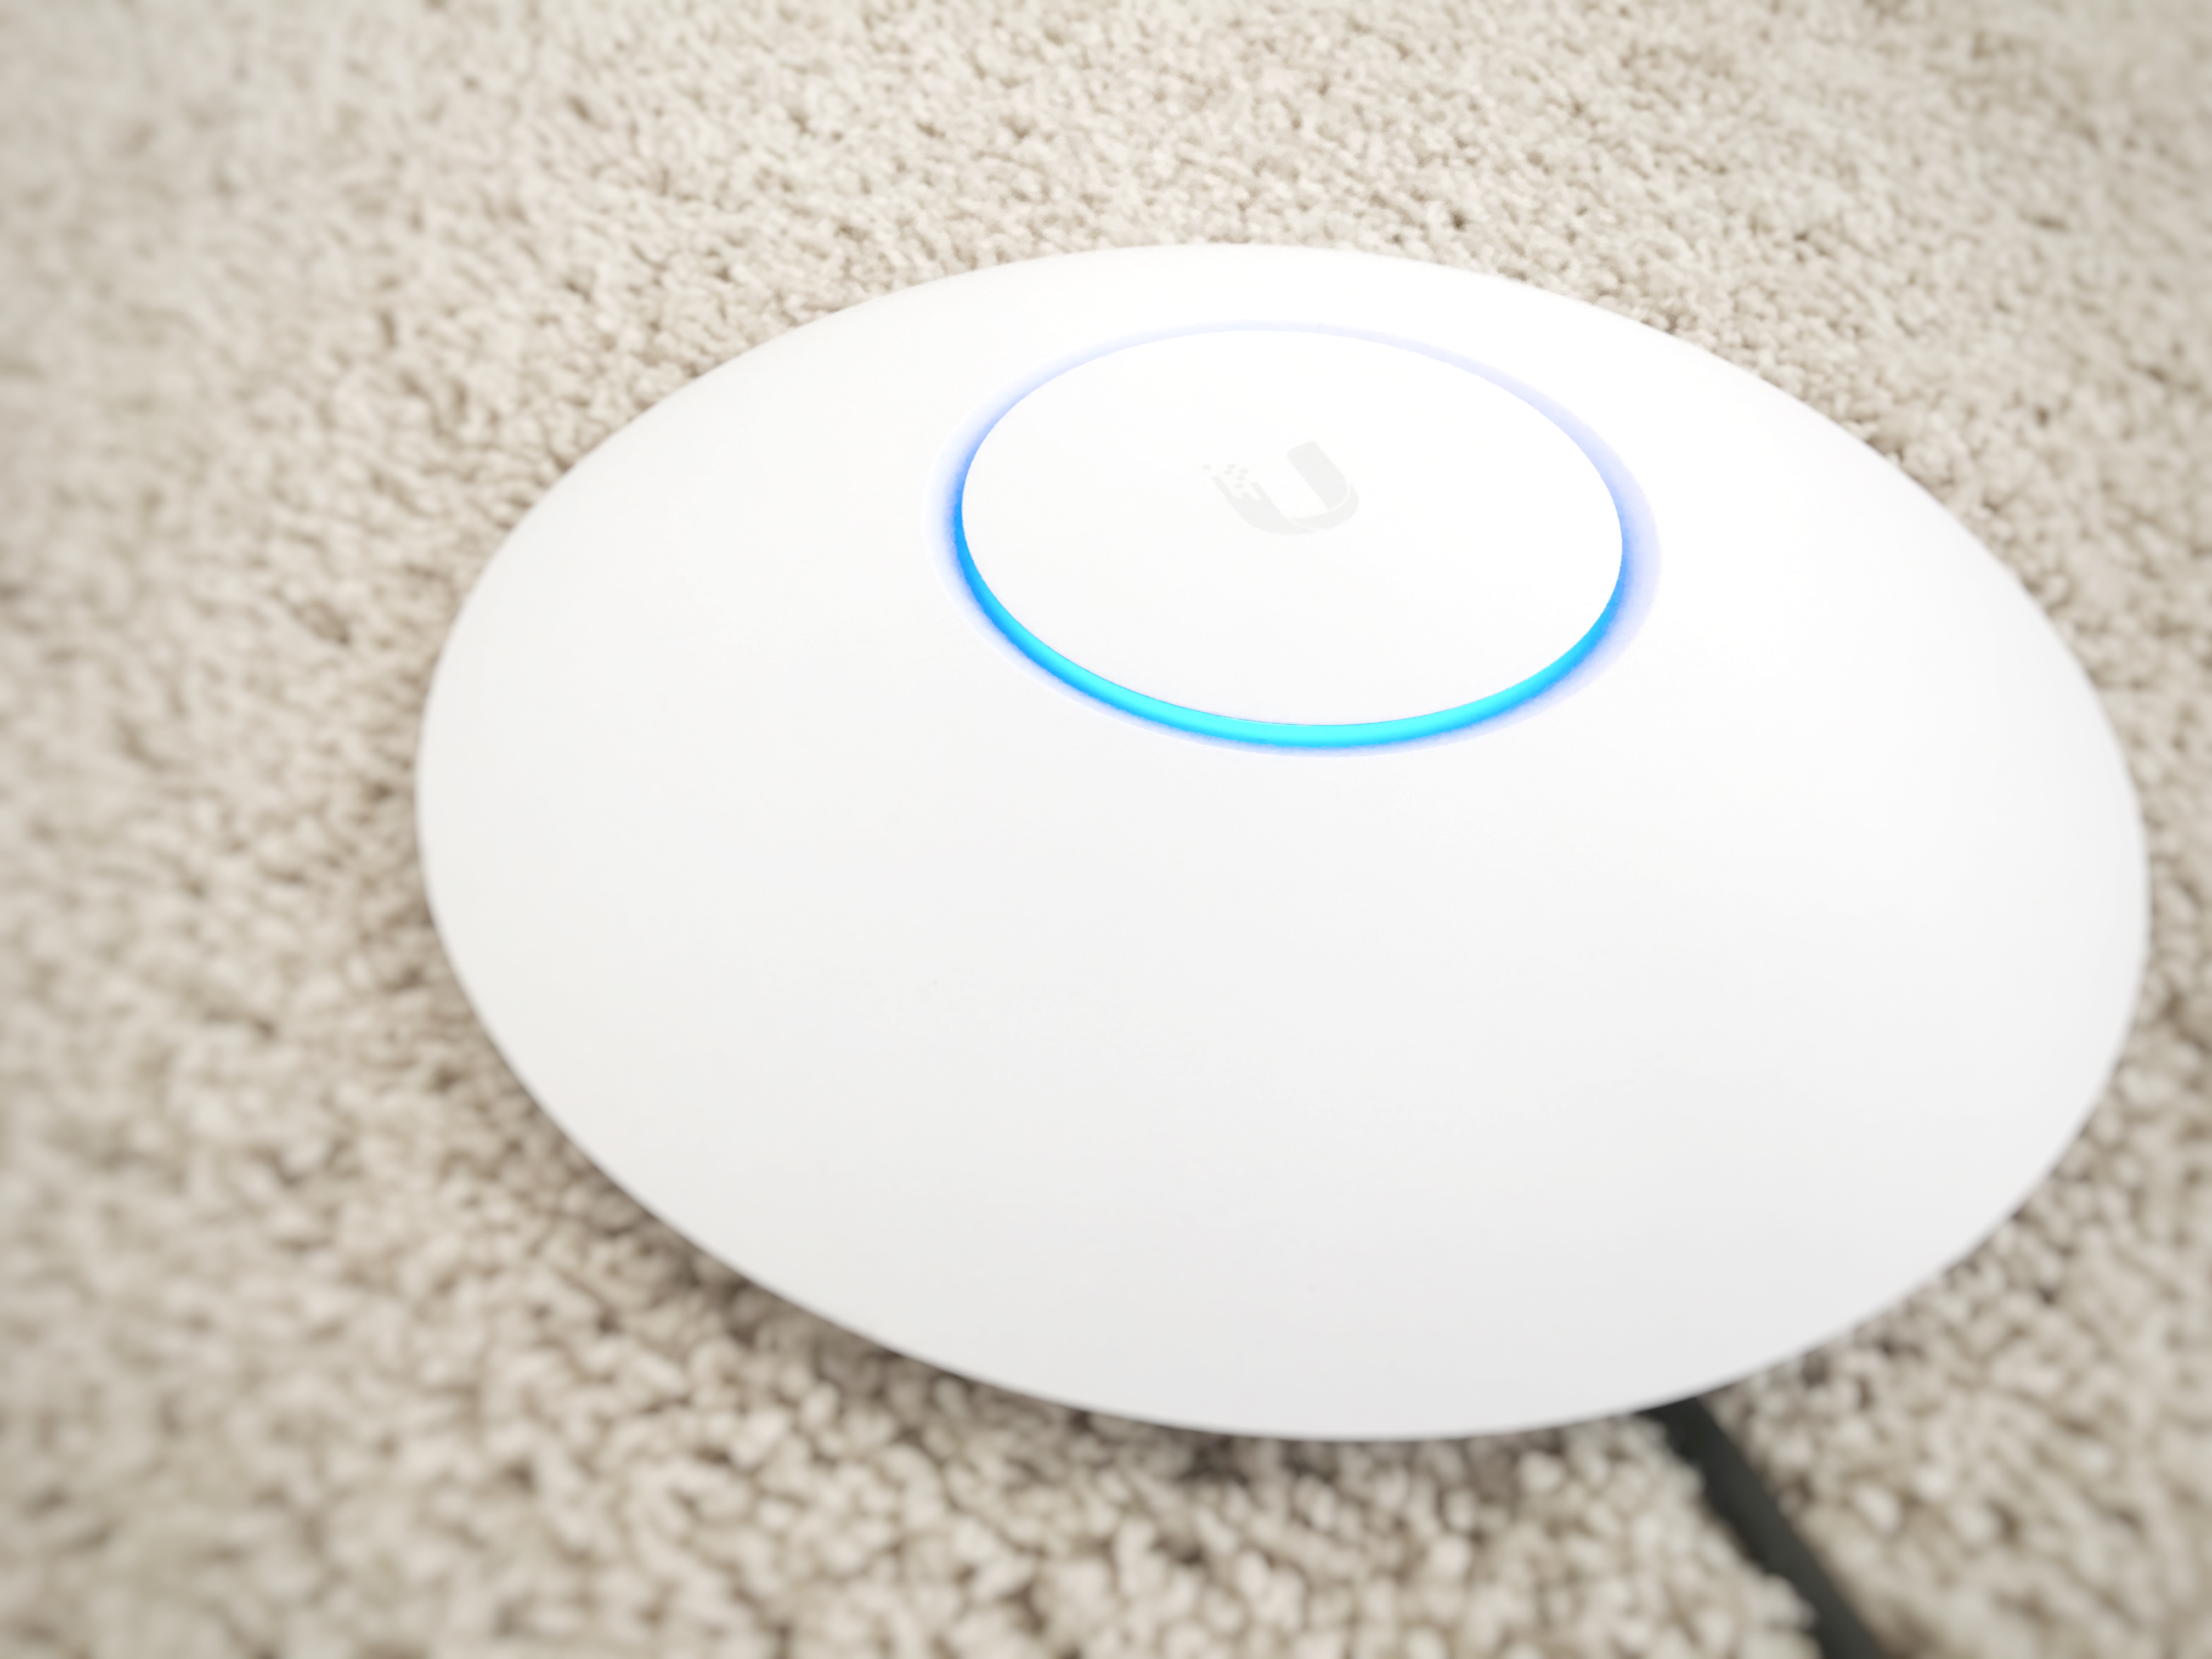 Learn how to install a Ubiquiti Network - Latest Tech News